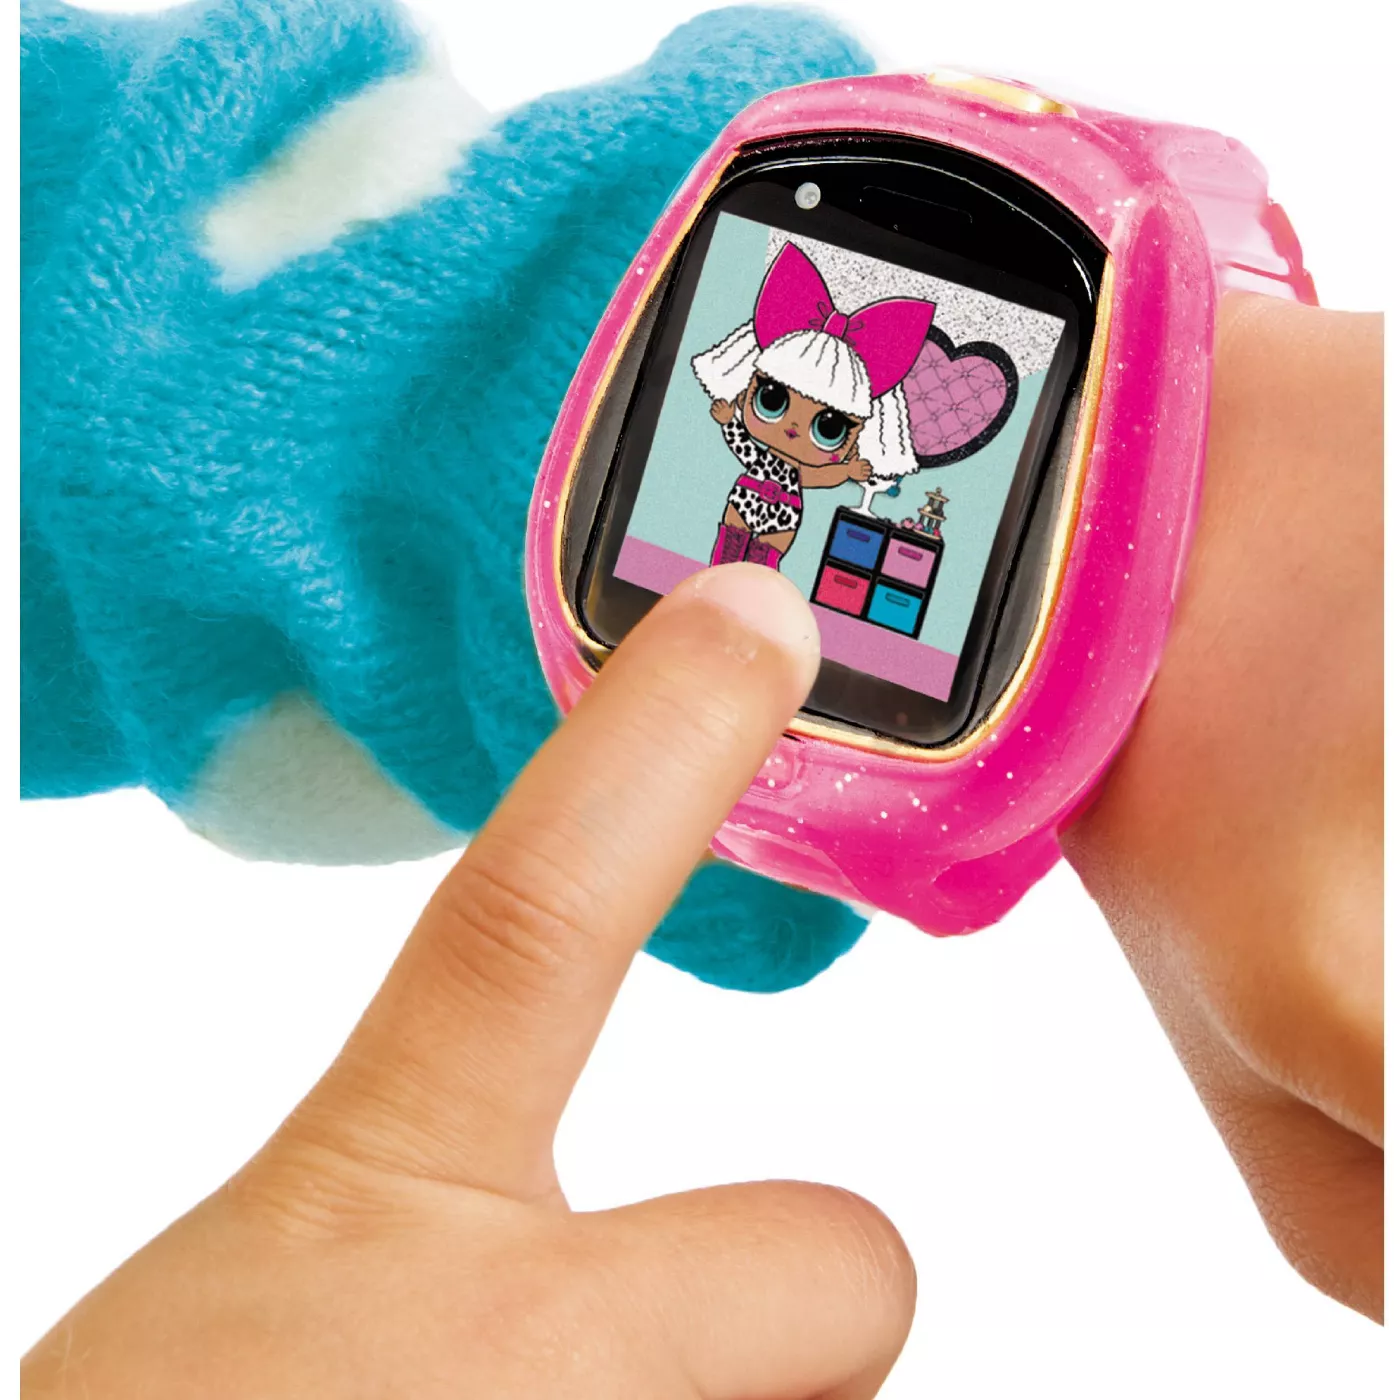 L.O.L. Surprise! Smartwatch! Pink -  Camera, Video, Games, Activities and More - £15.99 GBP